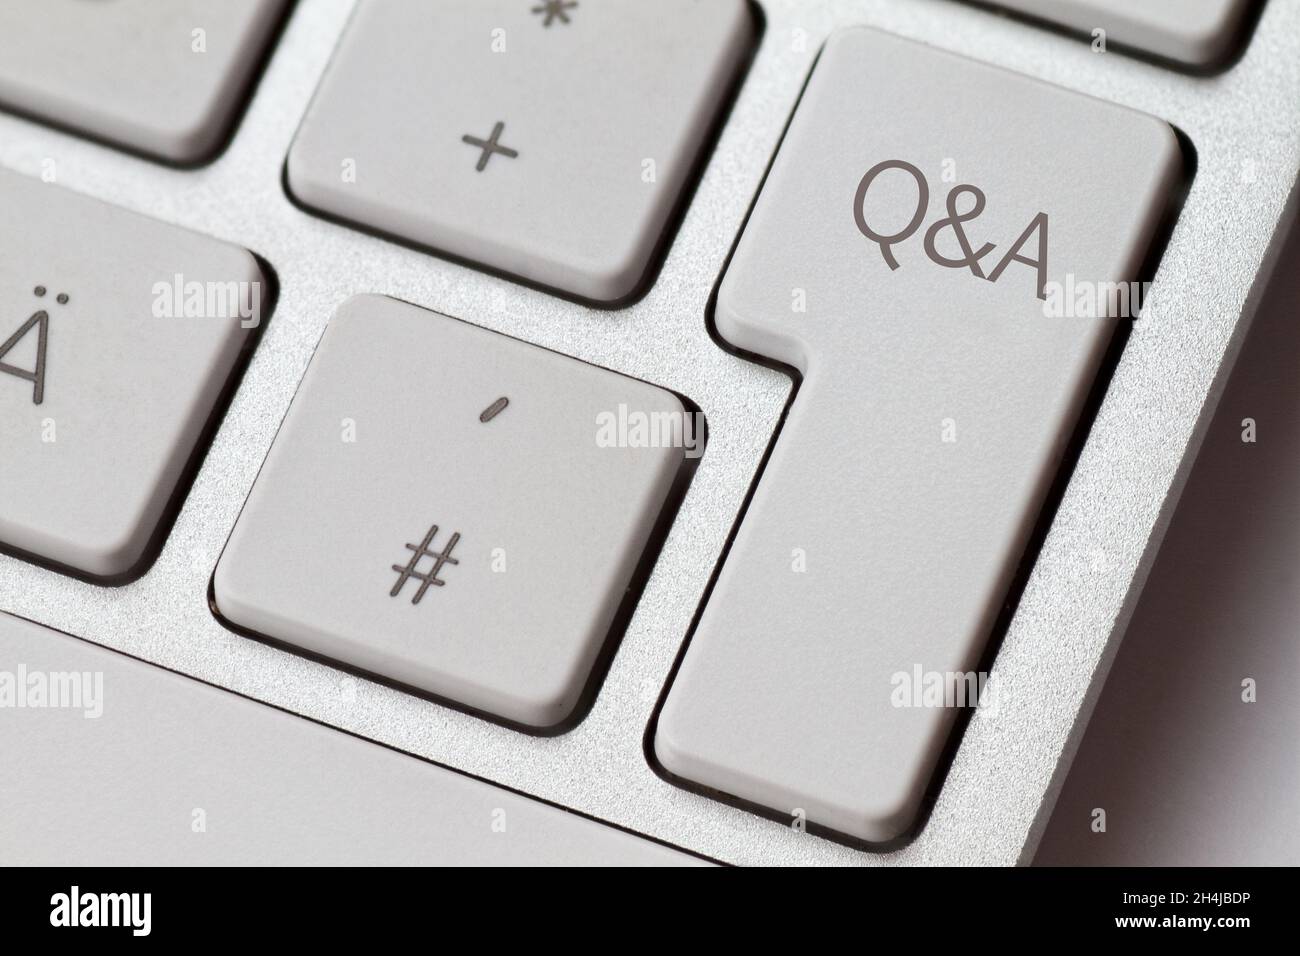 Q&A as an abbreviation on an aluminum keyboard from a computer Stock Photo